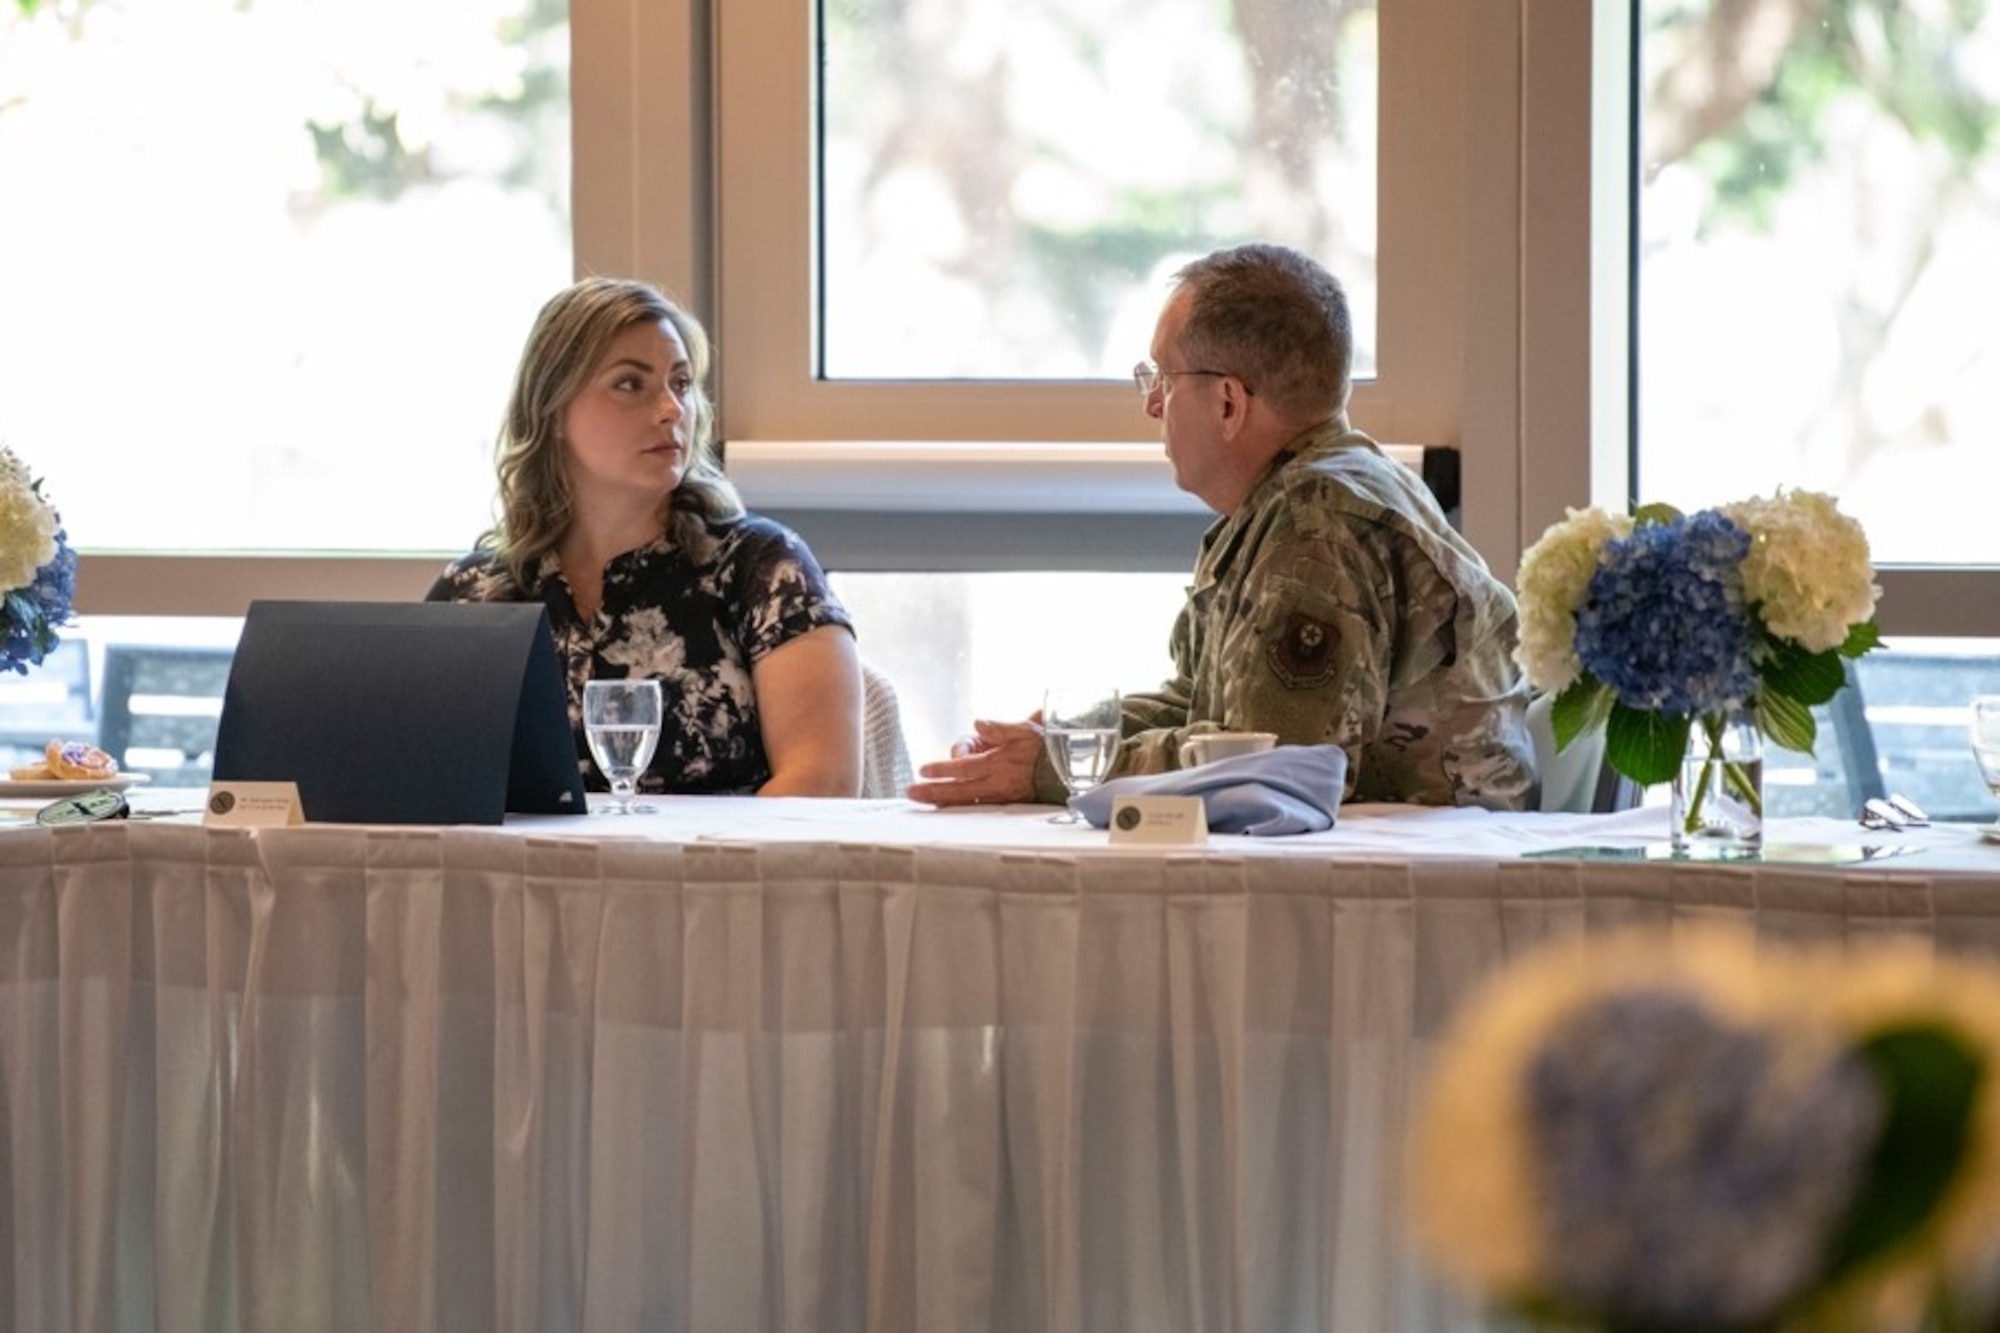 U.S. Air Force Lt. Gen. Jim Slife, commander of Air Force Special Operations Command, speaks with Katie-grace Young, operations intelligence team lead with the 11th Special Operations Intelligence Squadron, during the OAY Medallion breakfast at Hurlburt Field, Florida, May 11, 2022. In addition to the medallion breakfast, AFSOC formally recognized this year’s Outstanding Airmen of the Year award winners with a day of professional development events and a banquet (U.S. Air Force photo by Staff Sgt. Miranda Mahoney)